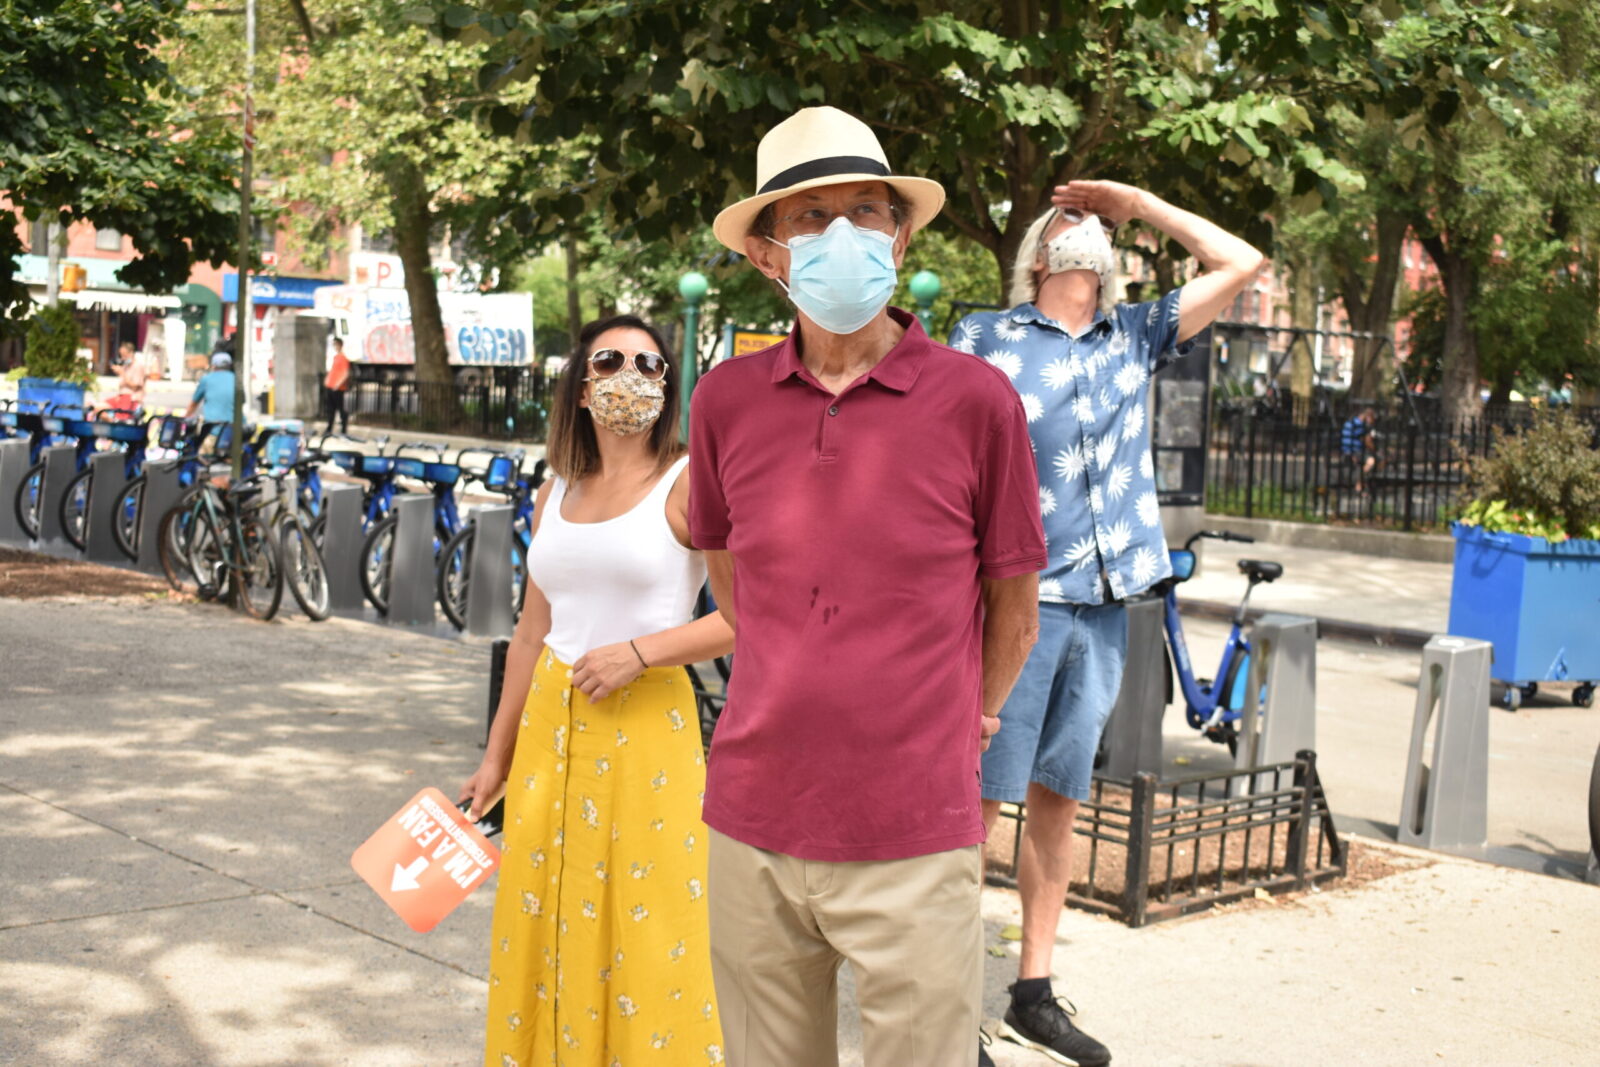 Masked individuals sightseeing on an outdoor tour